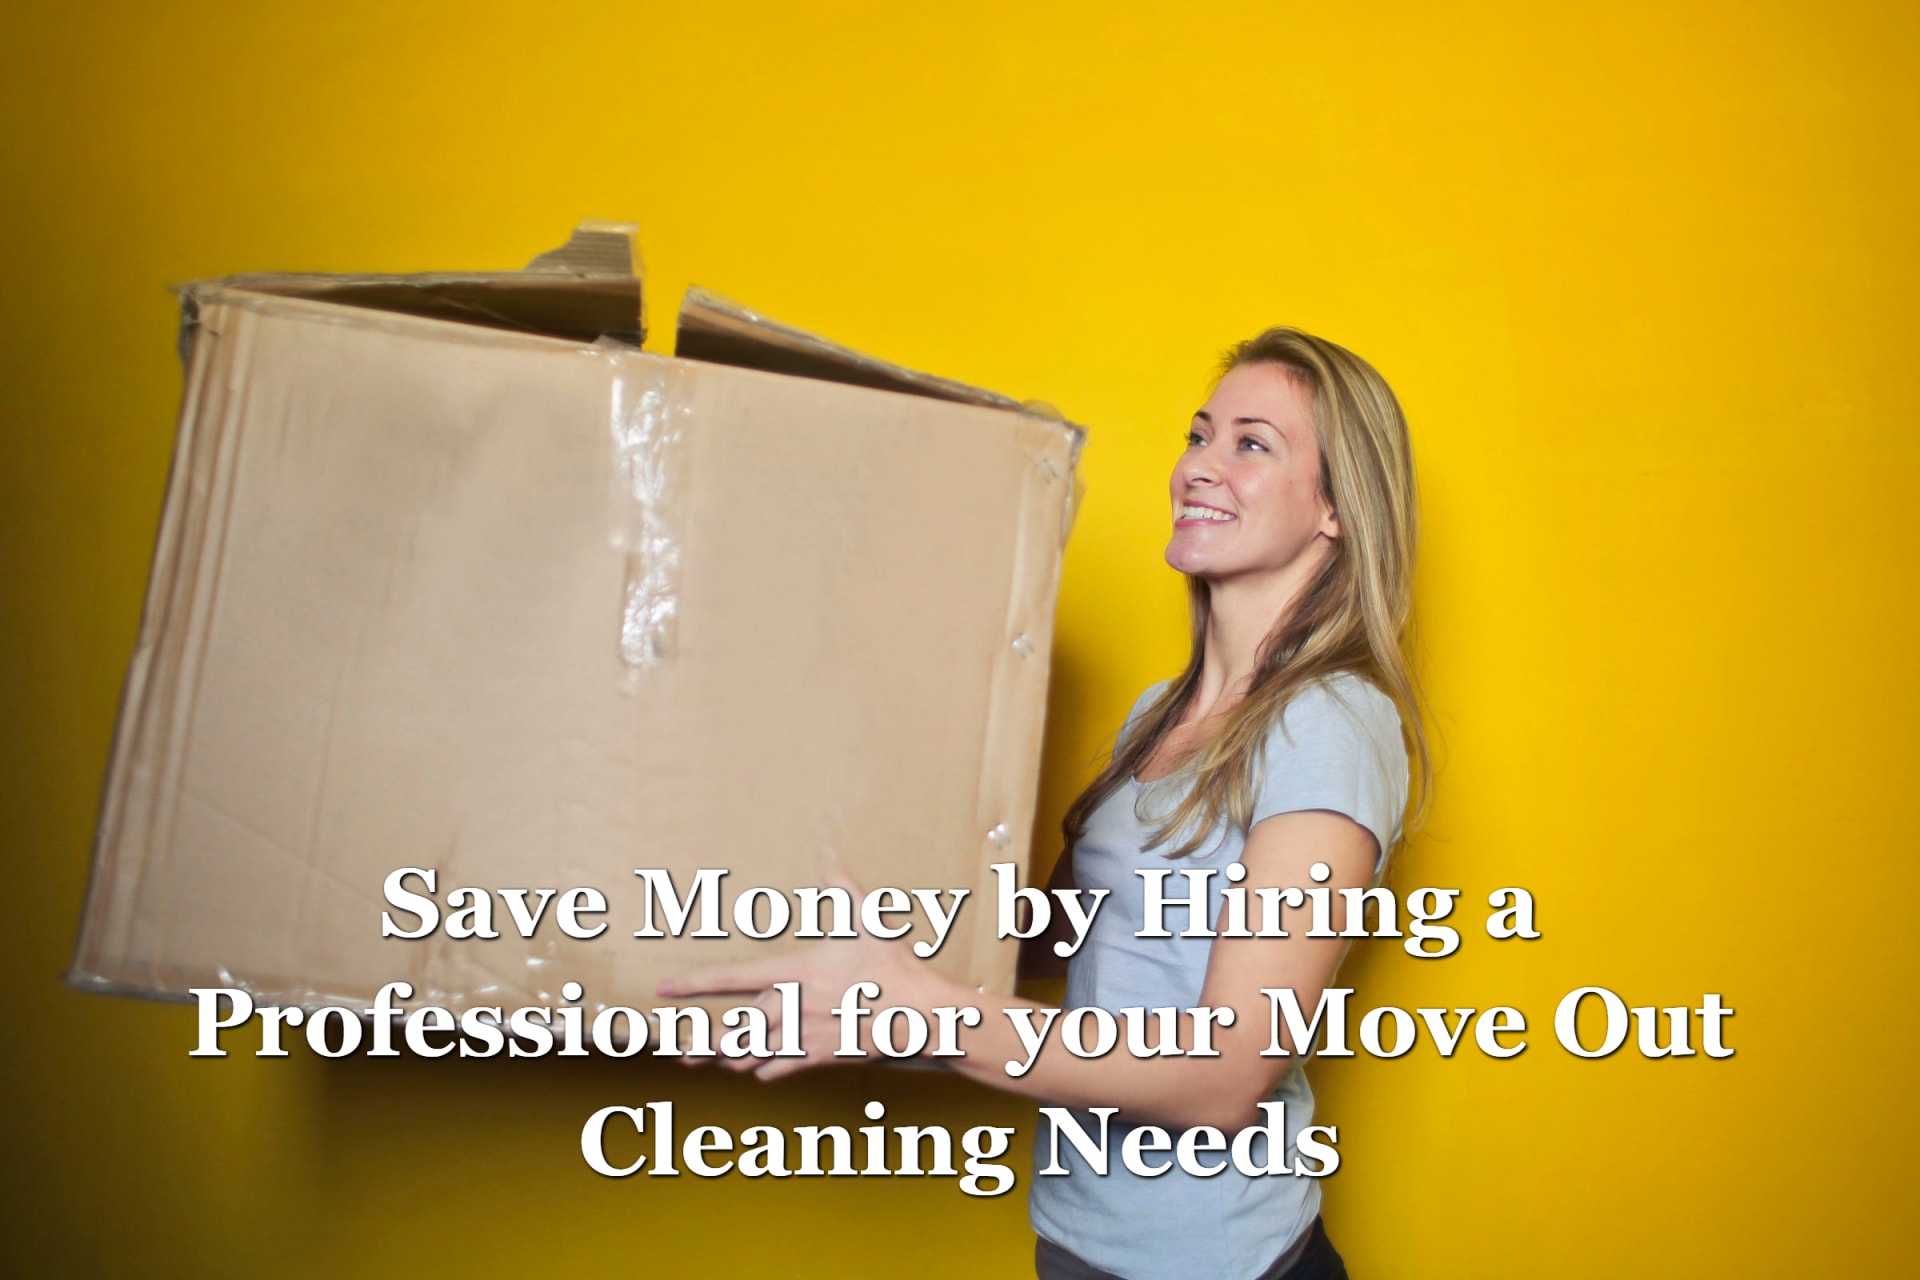 A woman holding a large cardboard box and smiling because she hired someone for her move out cleaning